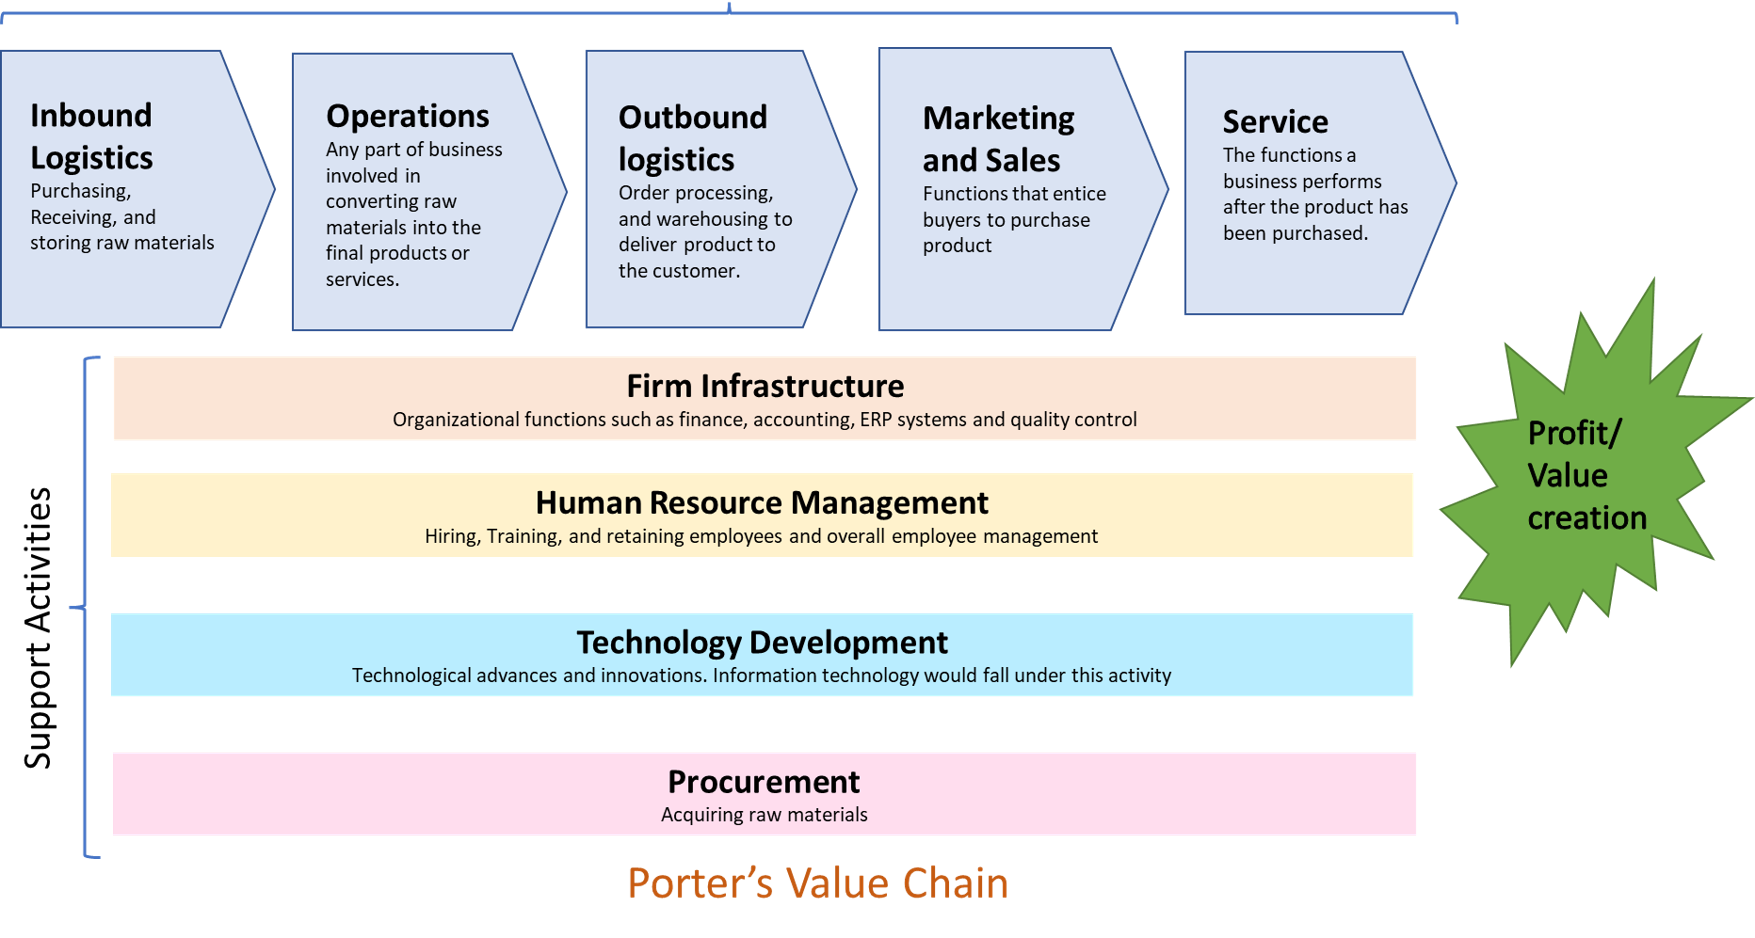 Porter's Value Chain illustrating Primary and Support activities. The primary activities include Inbound logistics, operations, outbound logistics, marketing and sales and service. The support activities include firm infrastructure, human resources management, technology development and procurement